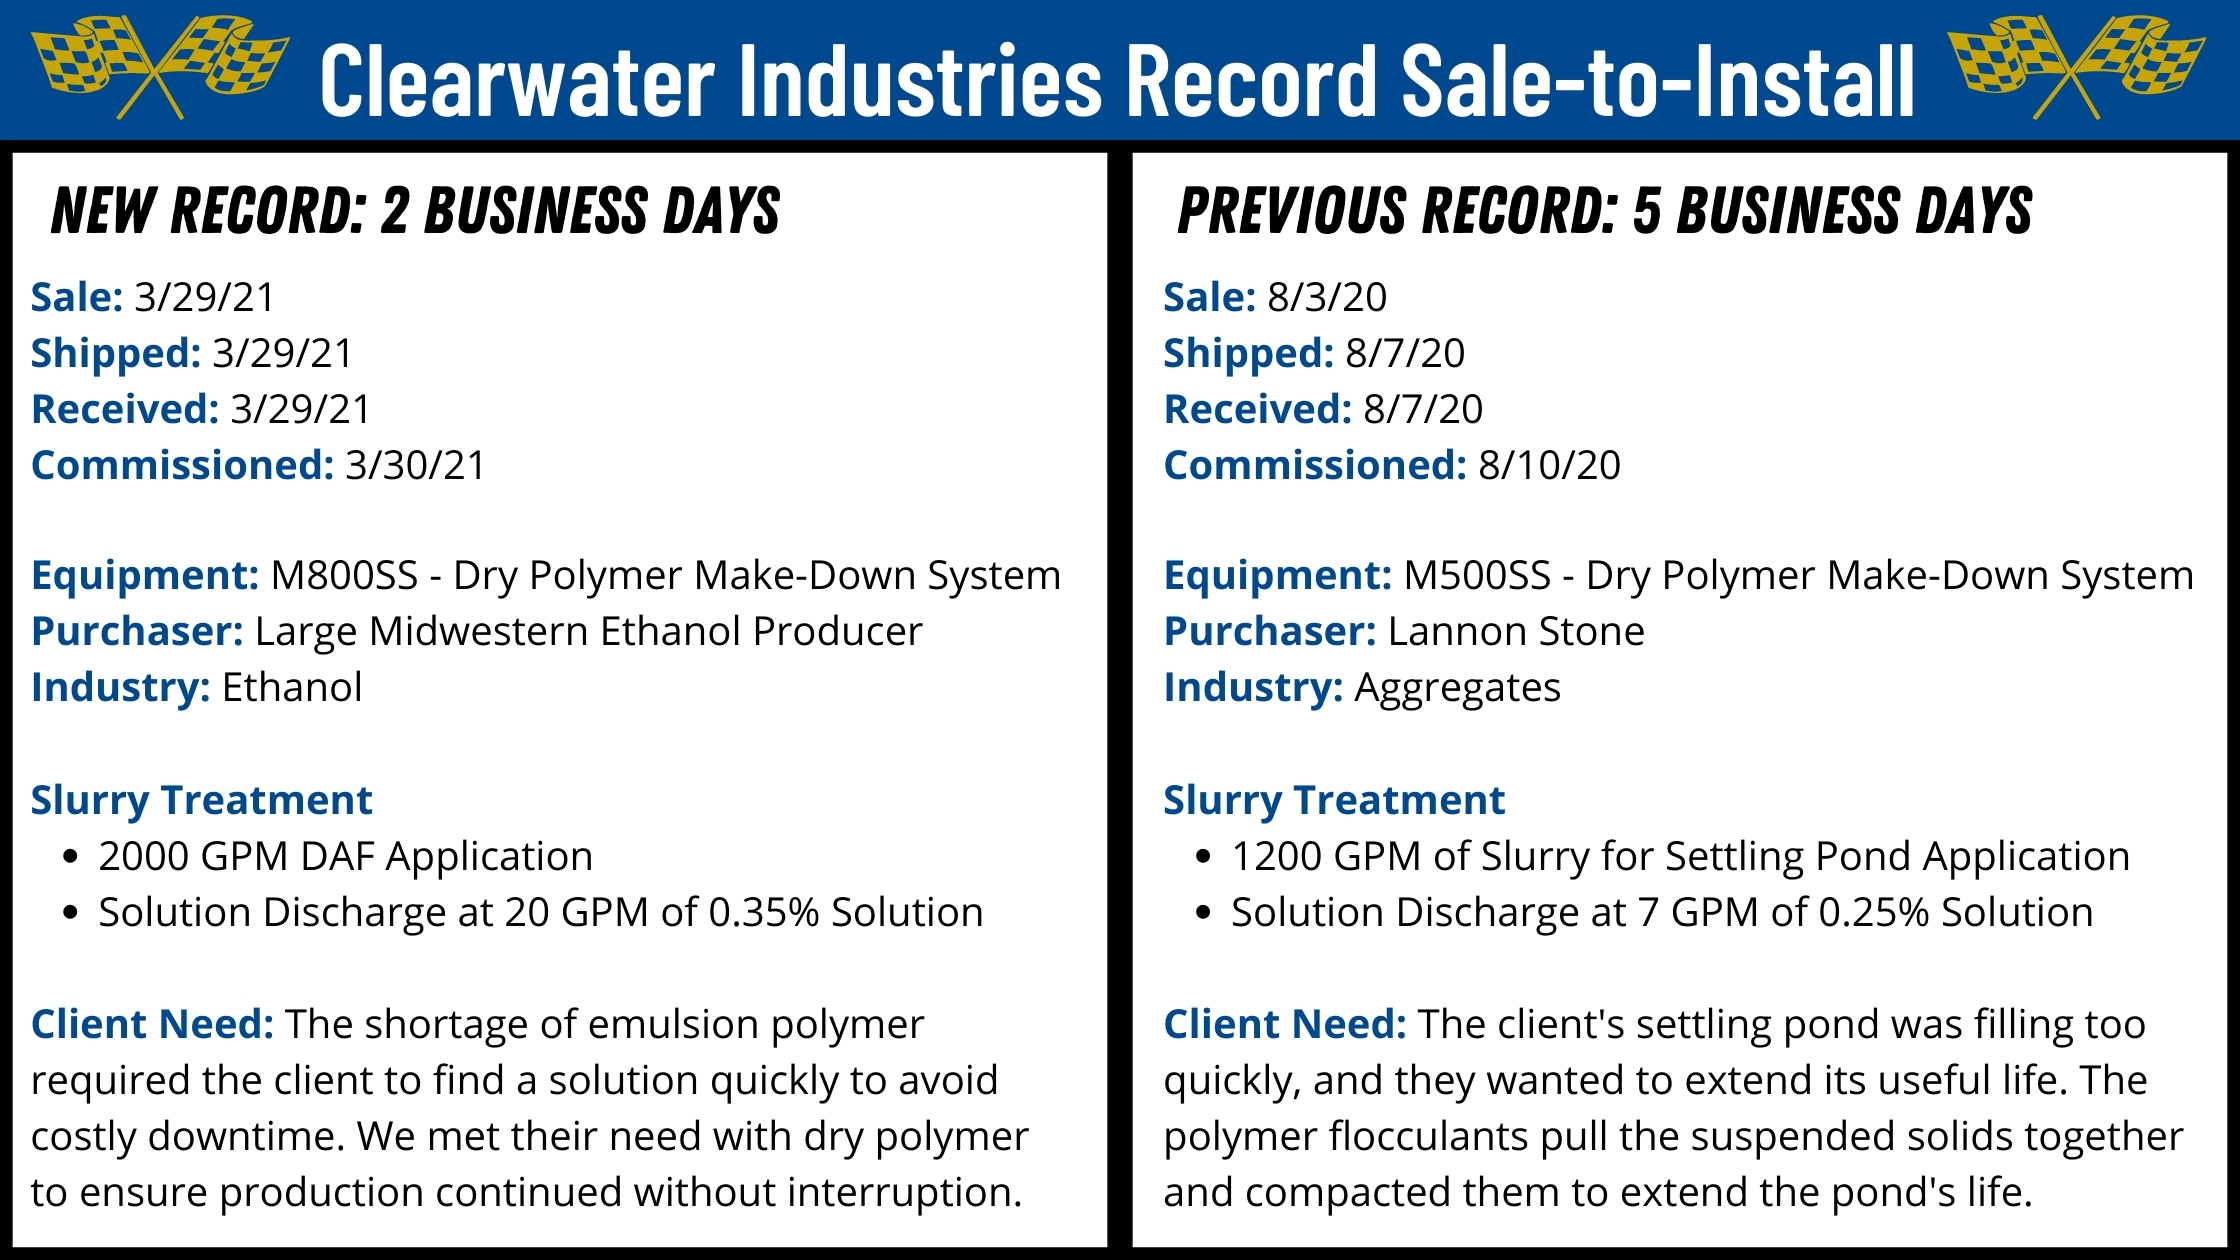 An image showing Clearwater Industries record sale-to-installs with the newest record on the left.